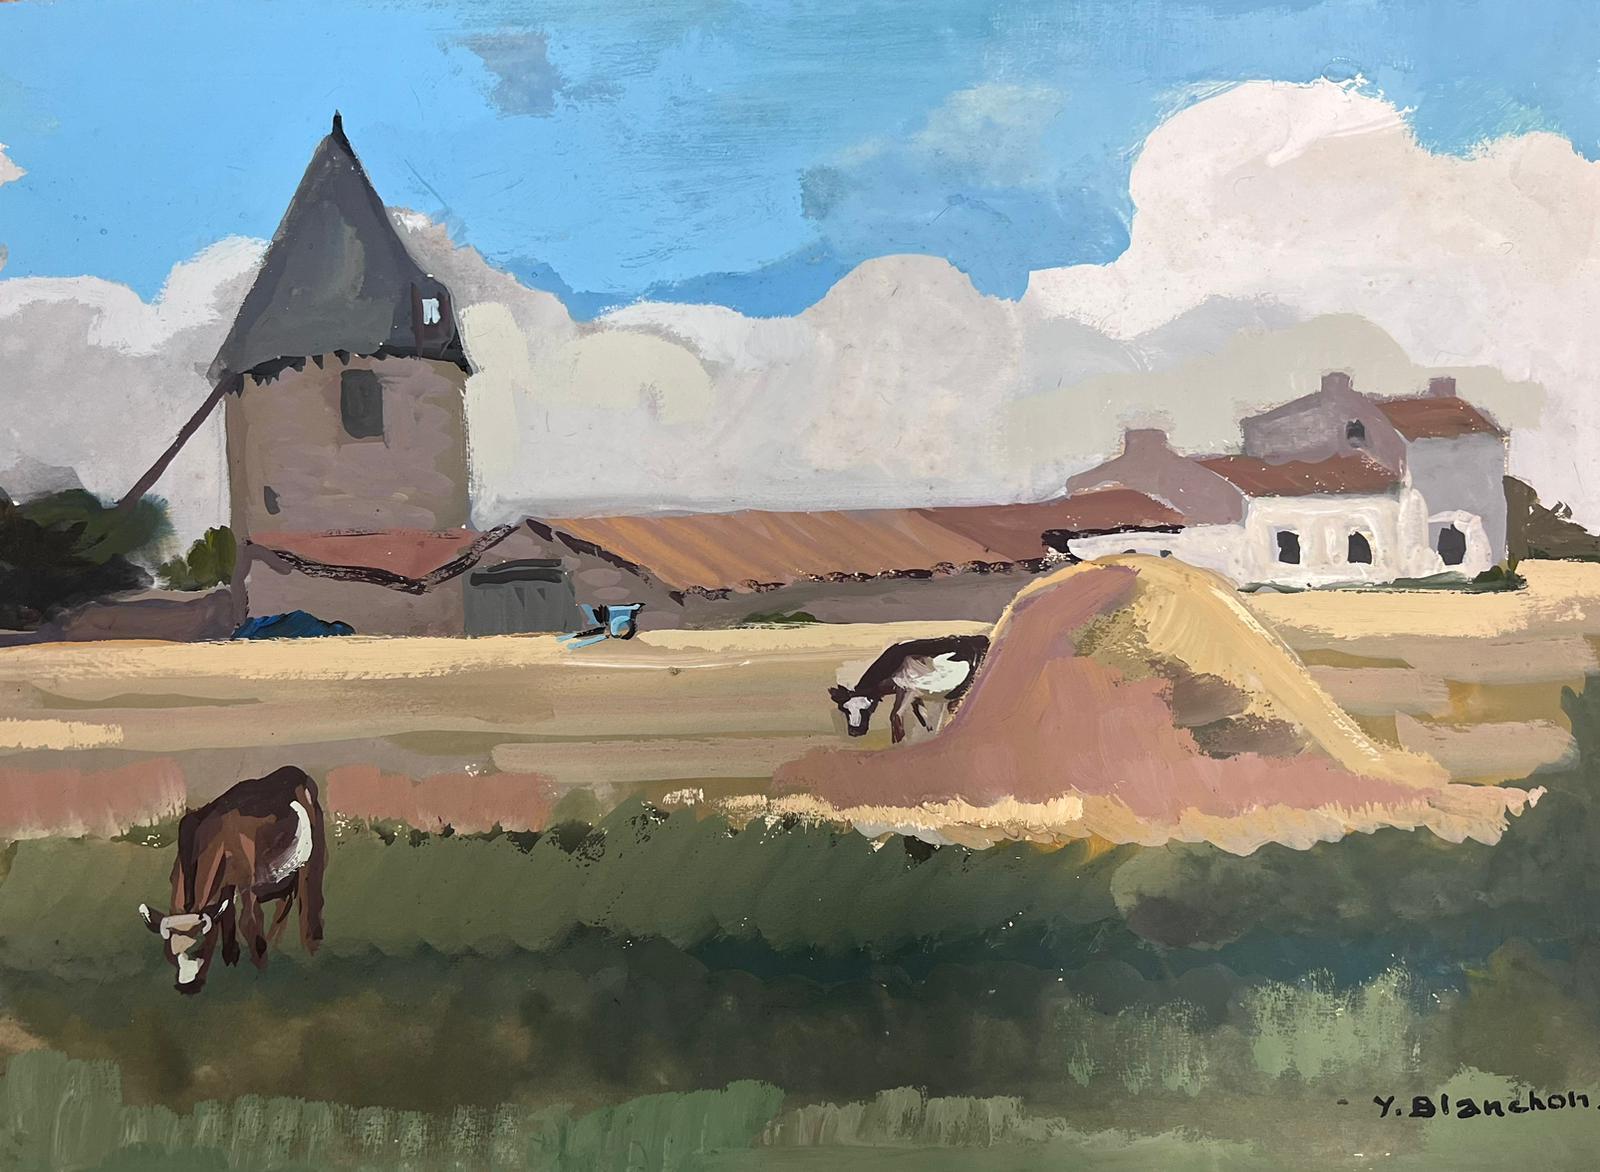 Cows Munching
by Y. Blanchon, French 1950's Impressionist artist
signed gouache on artist paper, unframed
painting: 12.5 x 16 inches
provenance: from a large private collection of this artists work in Northern France
condition: original, good and